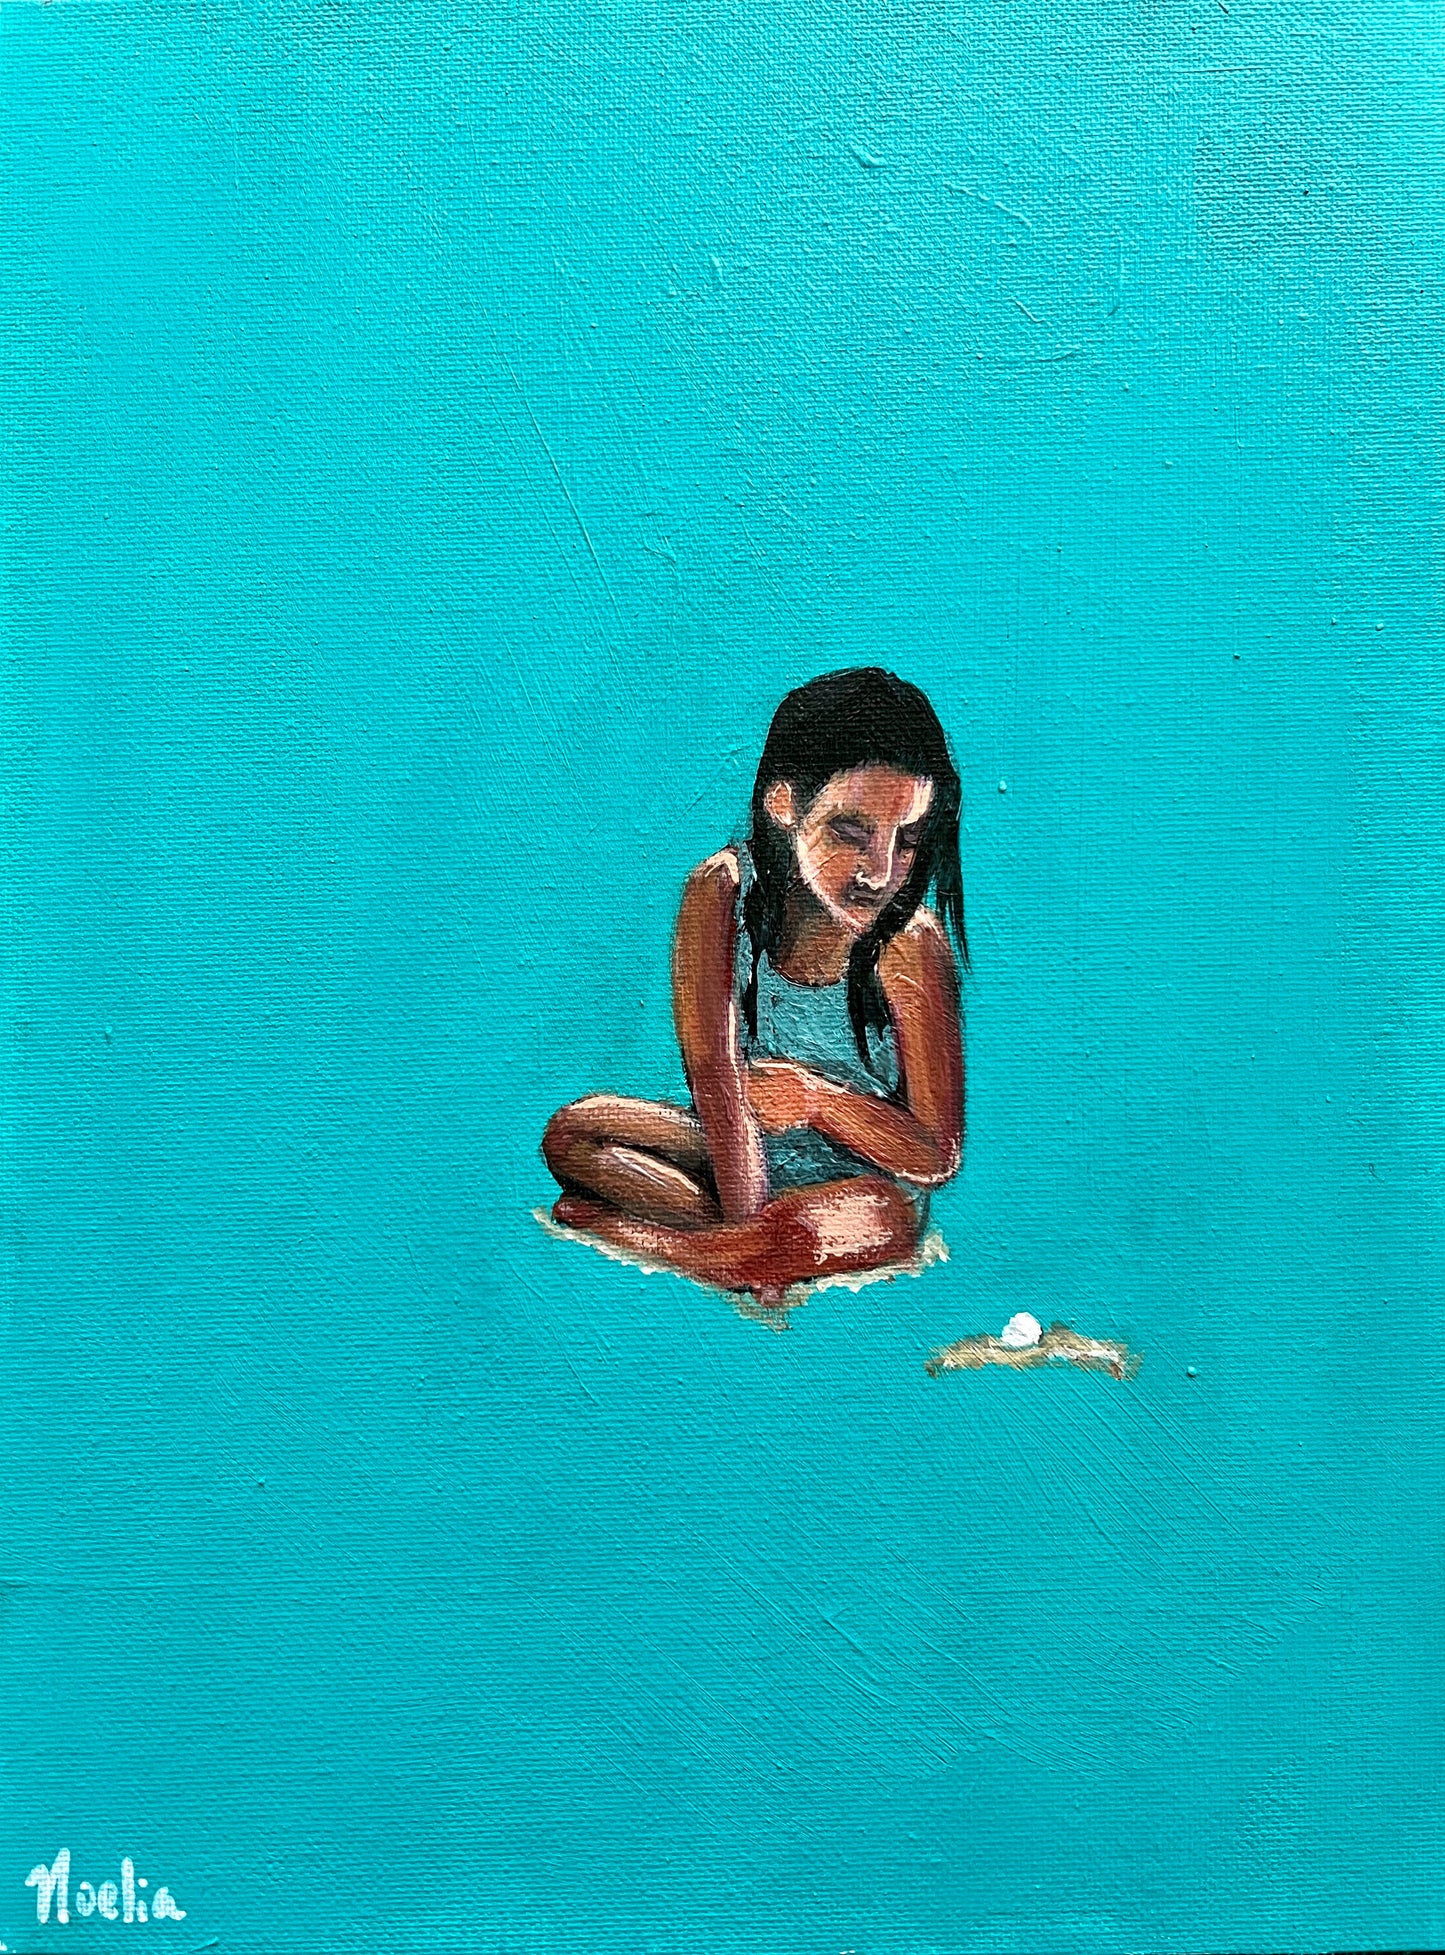 Little girl in bathing suit with dark hair sitting on the beach sand looking at a white shell in the sound. Solid teal blue background. 9 x 12 acrylic painting on flat panel. Beach 